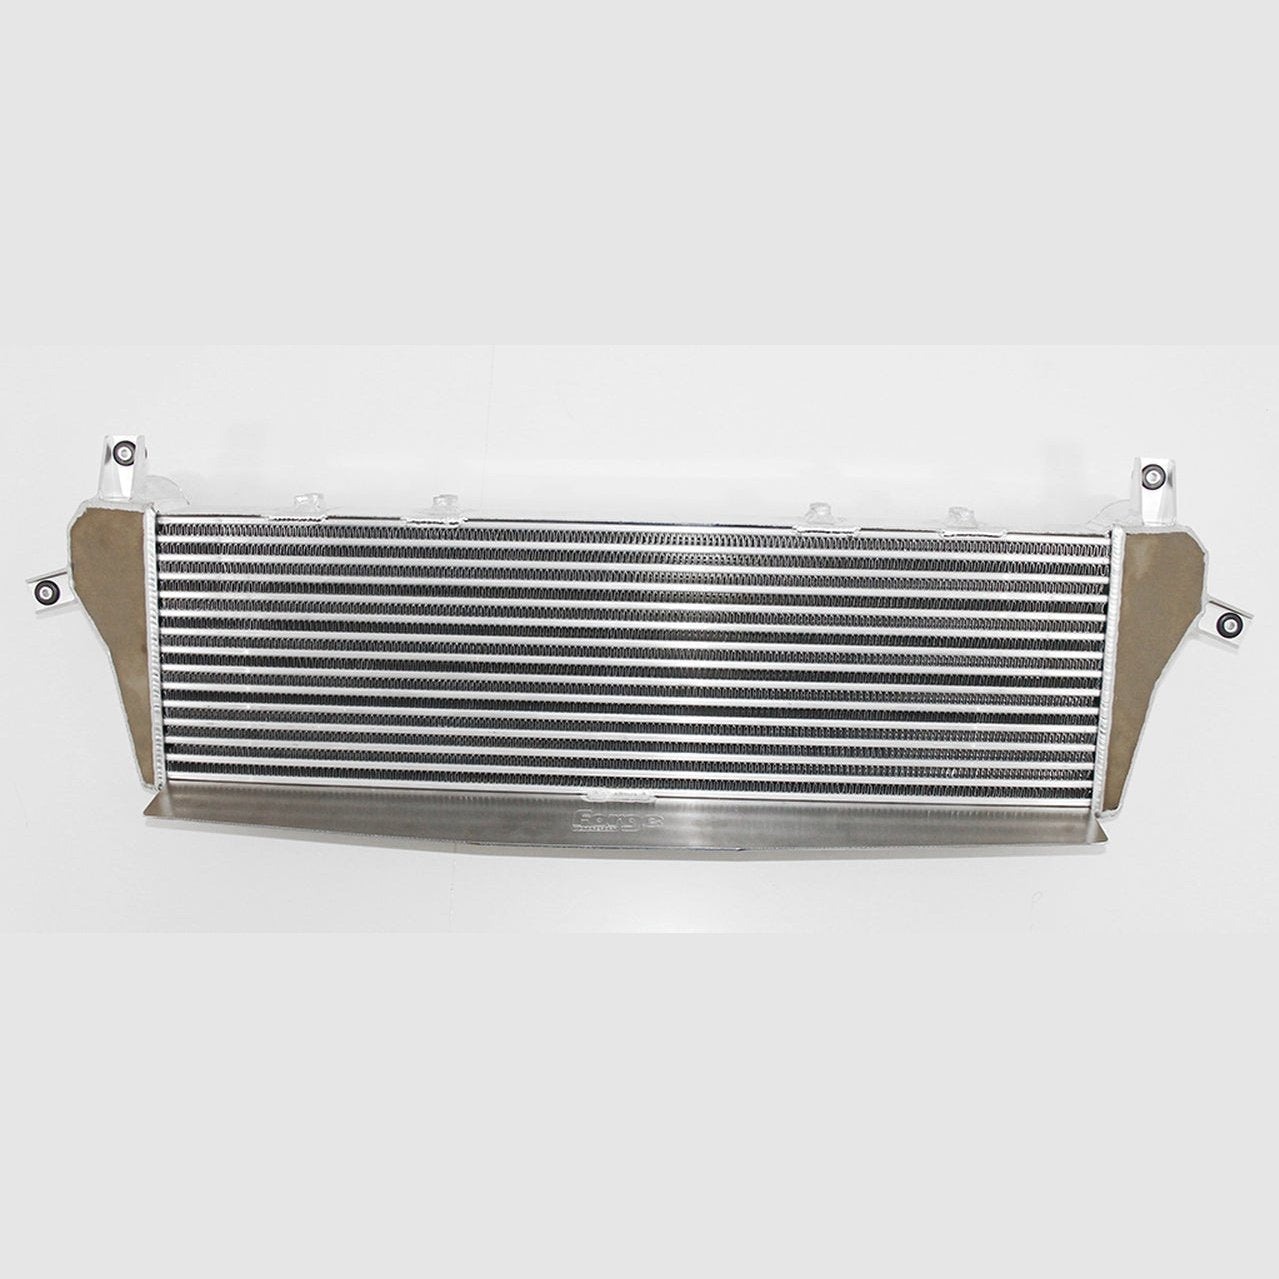 Forge Intercooler for VW T5 Transporter 2.0TDI Twin Turbo